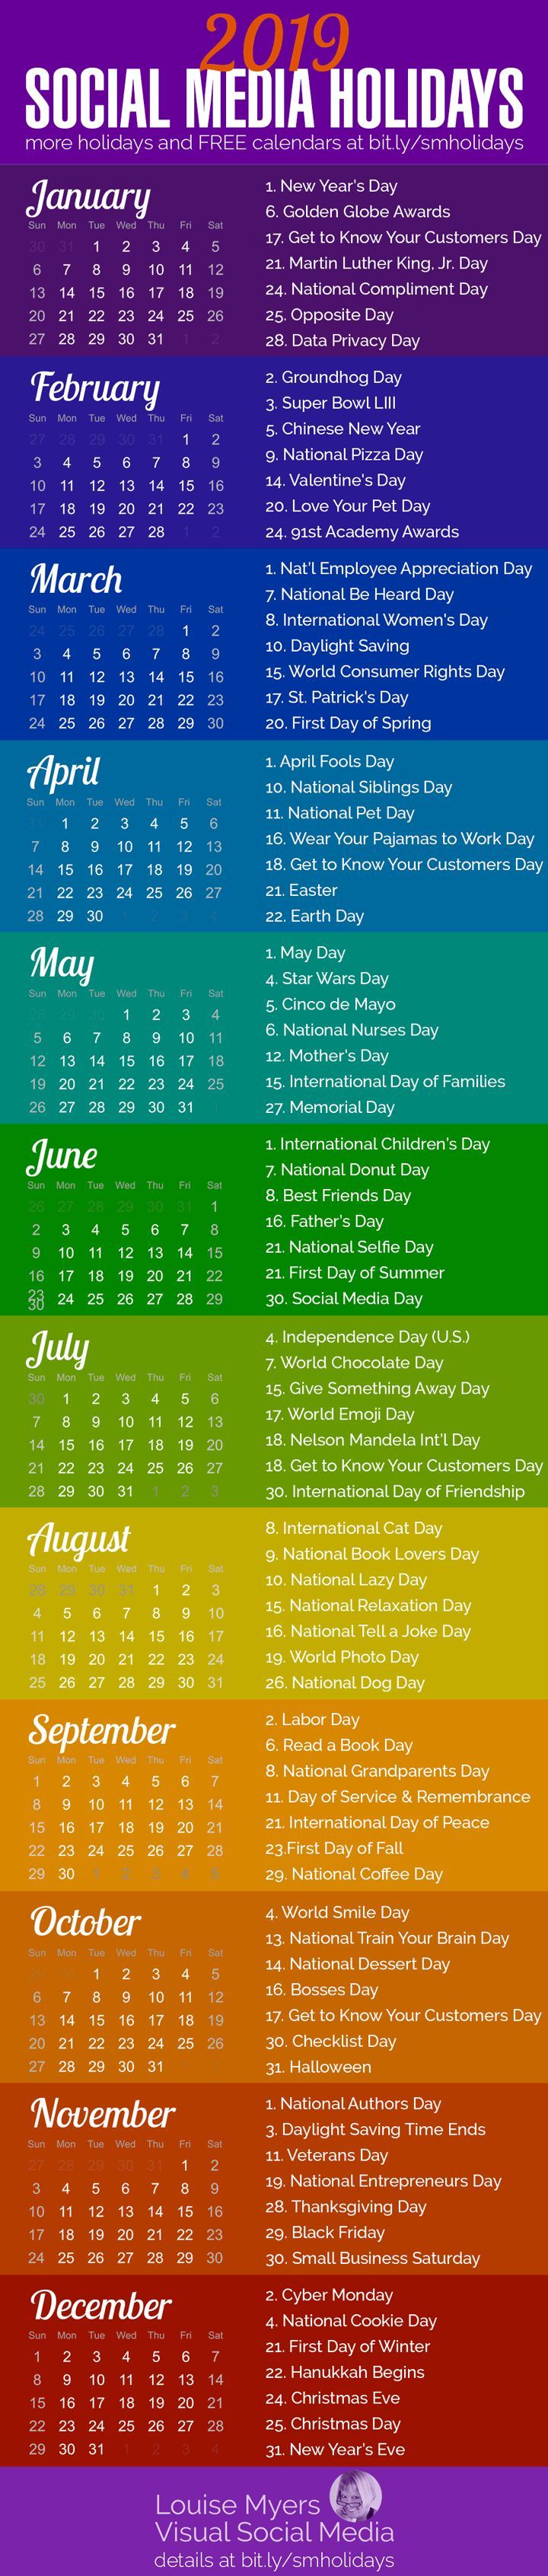 Marketing-Infographic-Social-media-marketing-tips-These-2019-holidays-are-essential-for-spicing-up-yo Marketing Infographic : Social media marketing tips: These 2019 holidays are essential for spicing up yo...